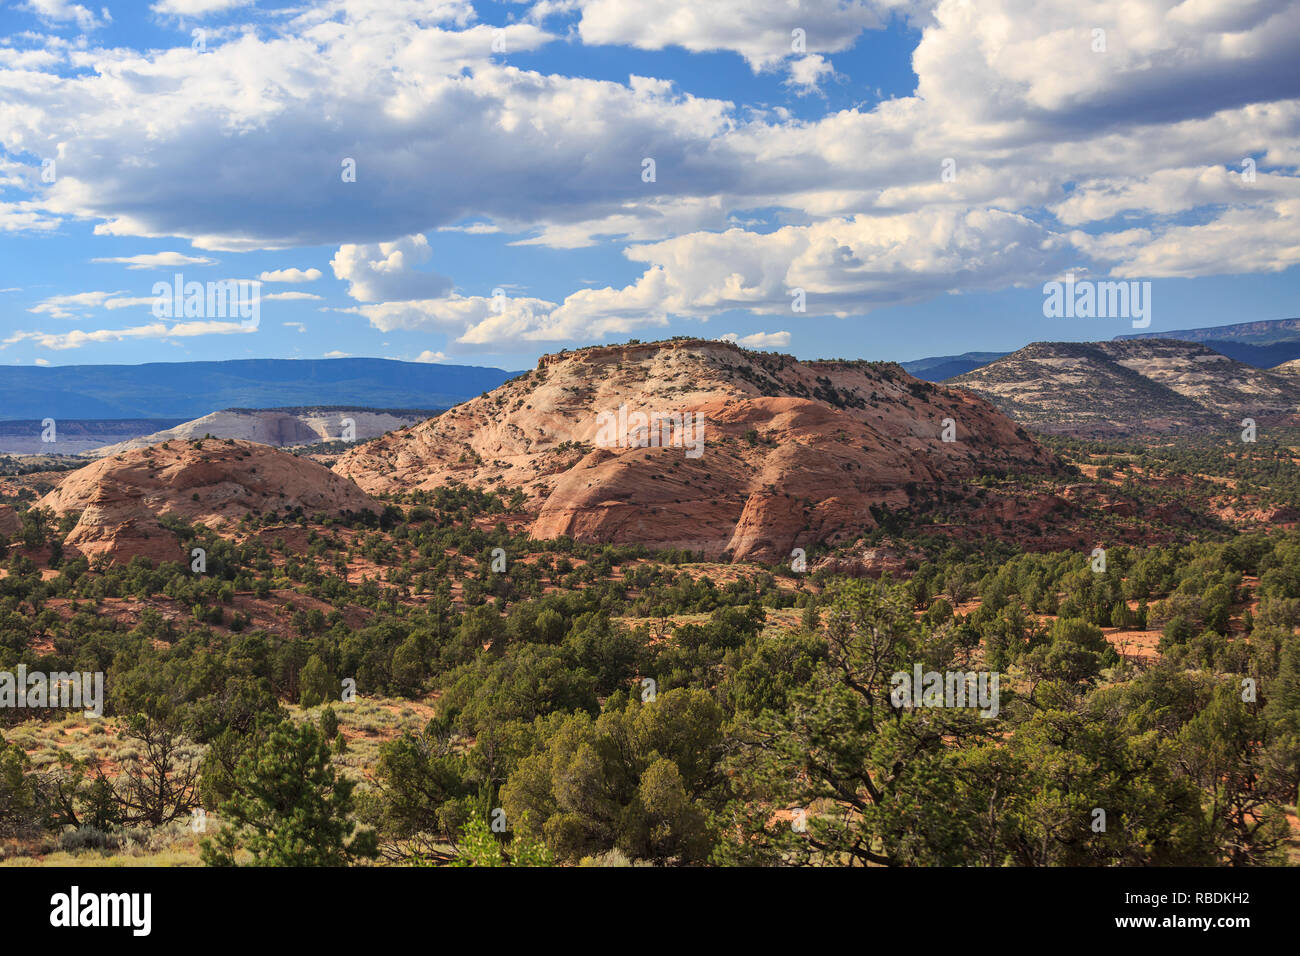 view of the red rock landscape, with blue sky and puffy white clouds, from the Escalante Grand Staircase region in Southern Utah Stock Photo